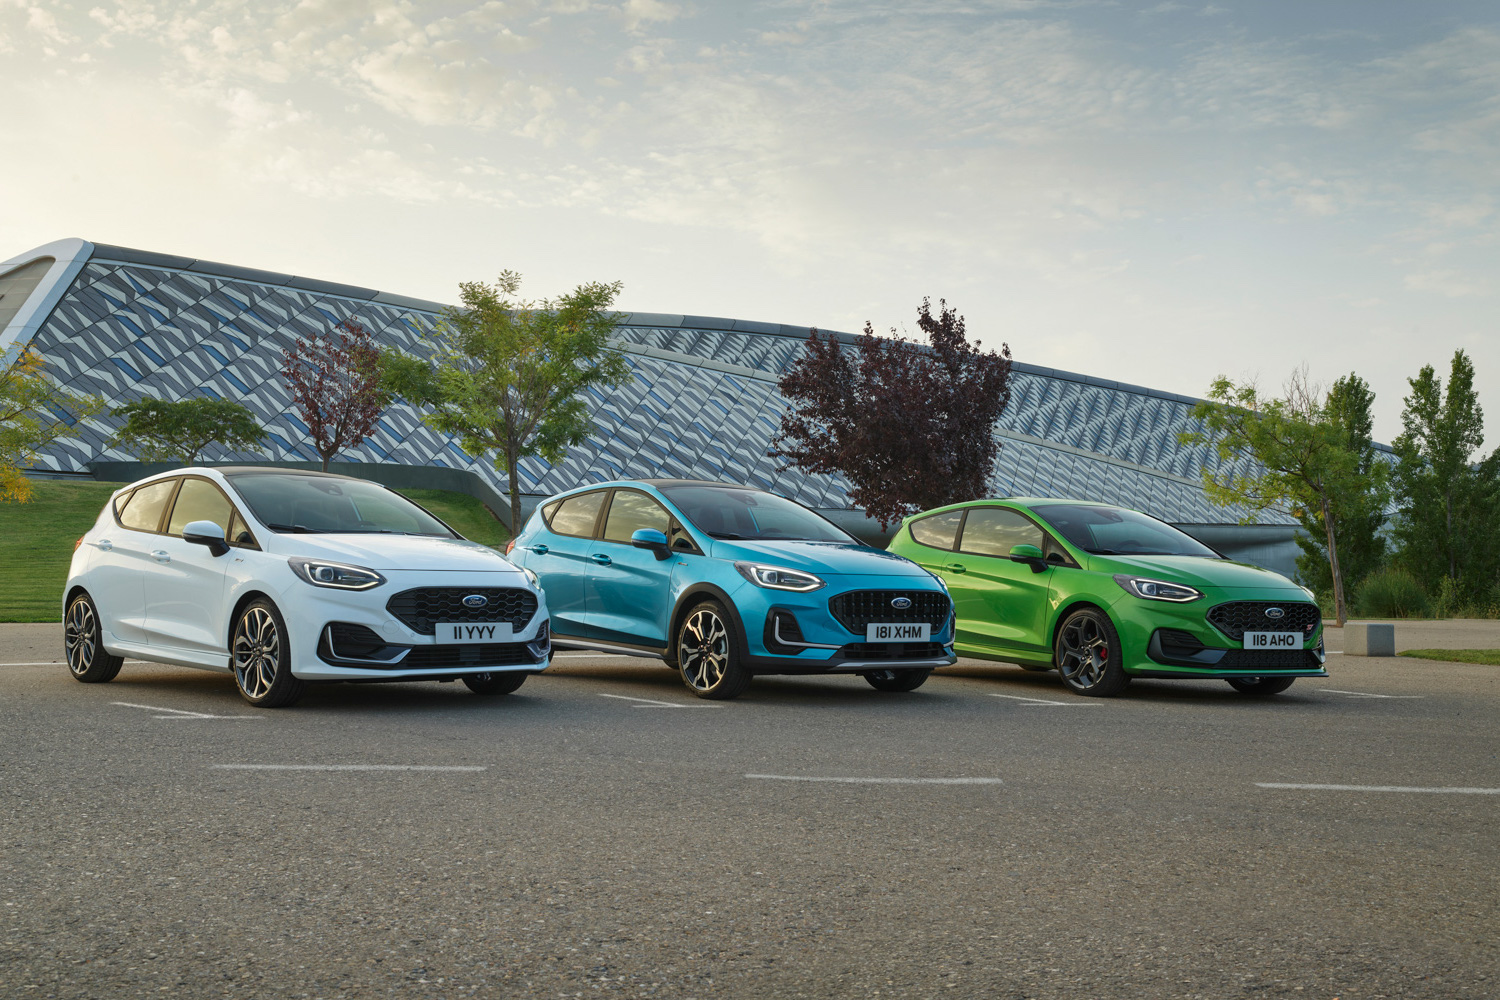 Ford gives the Fiesta a facelift